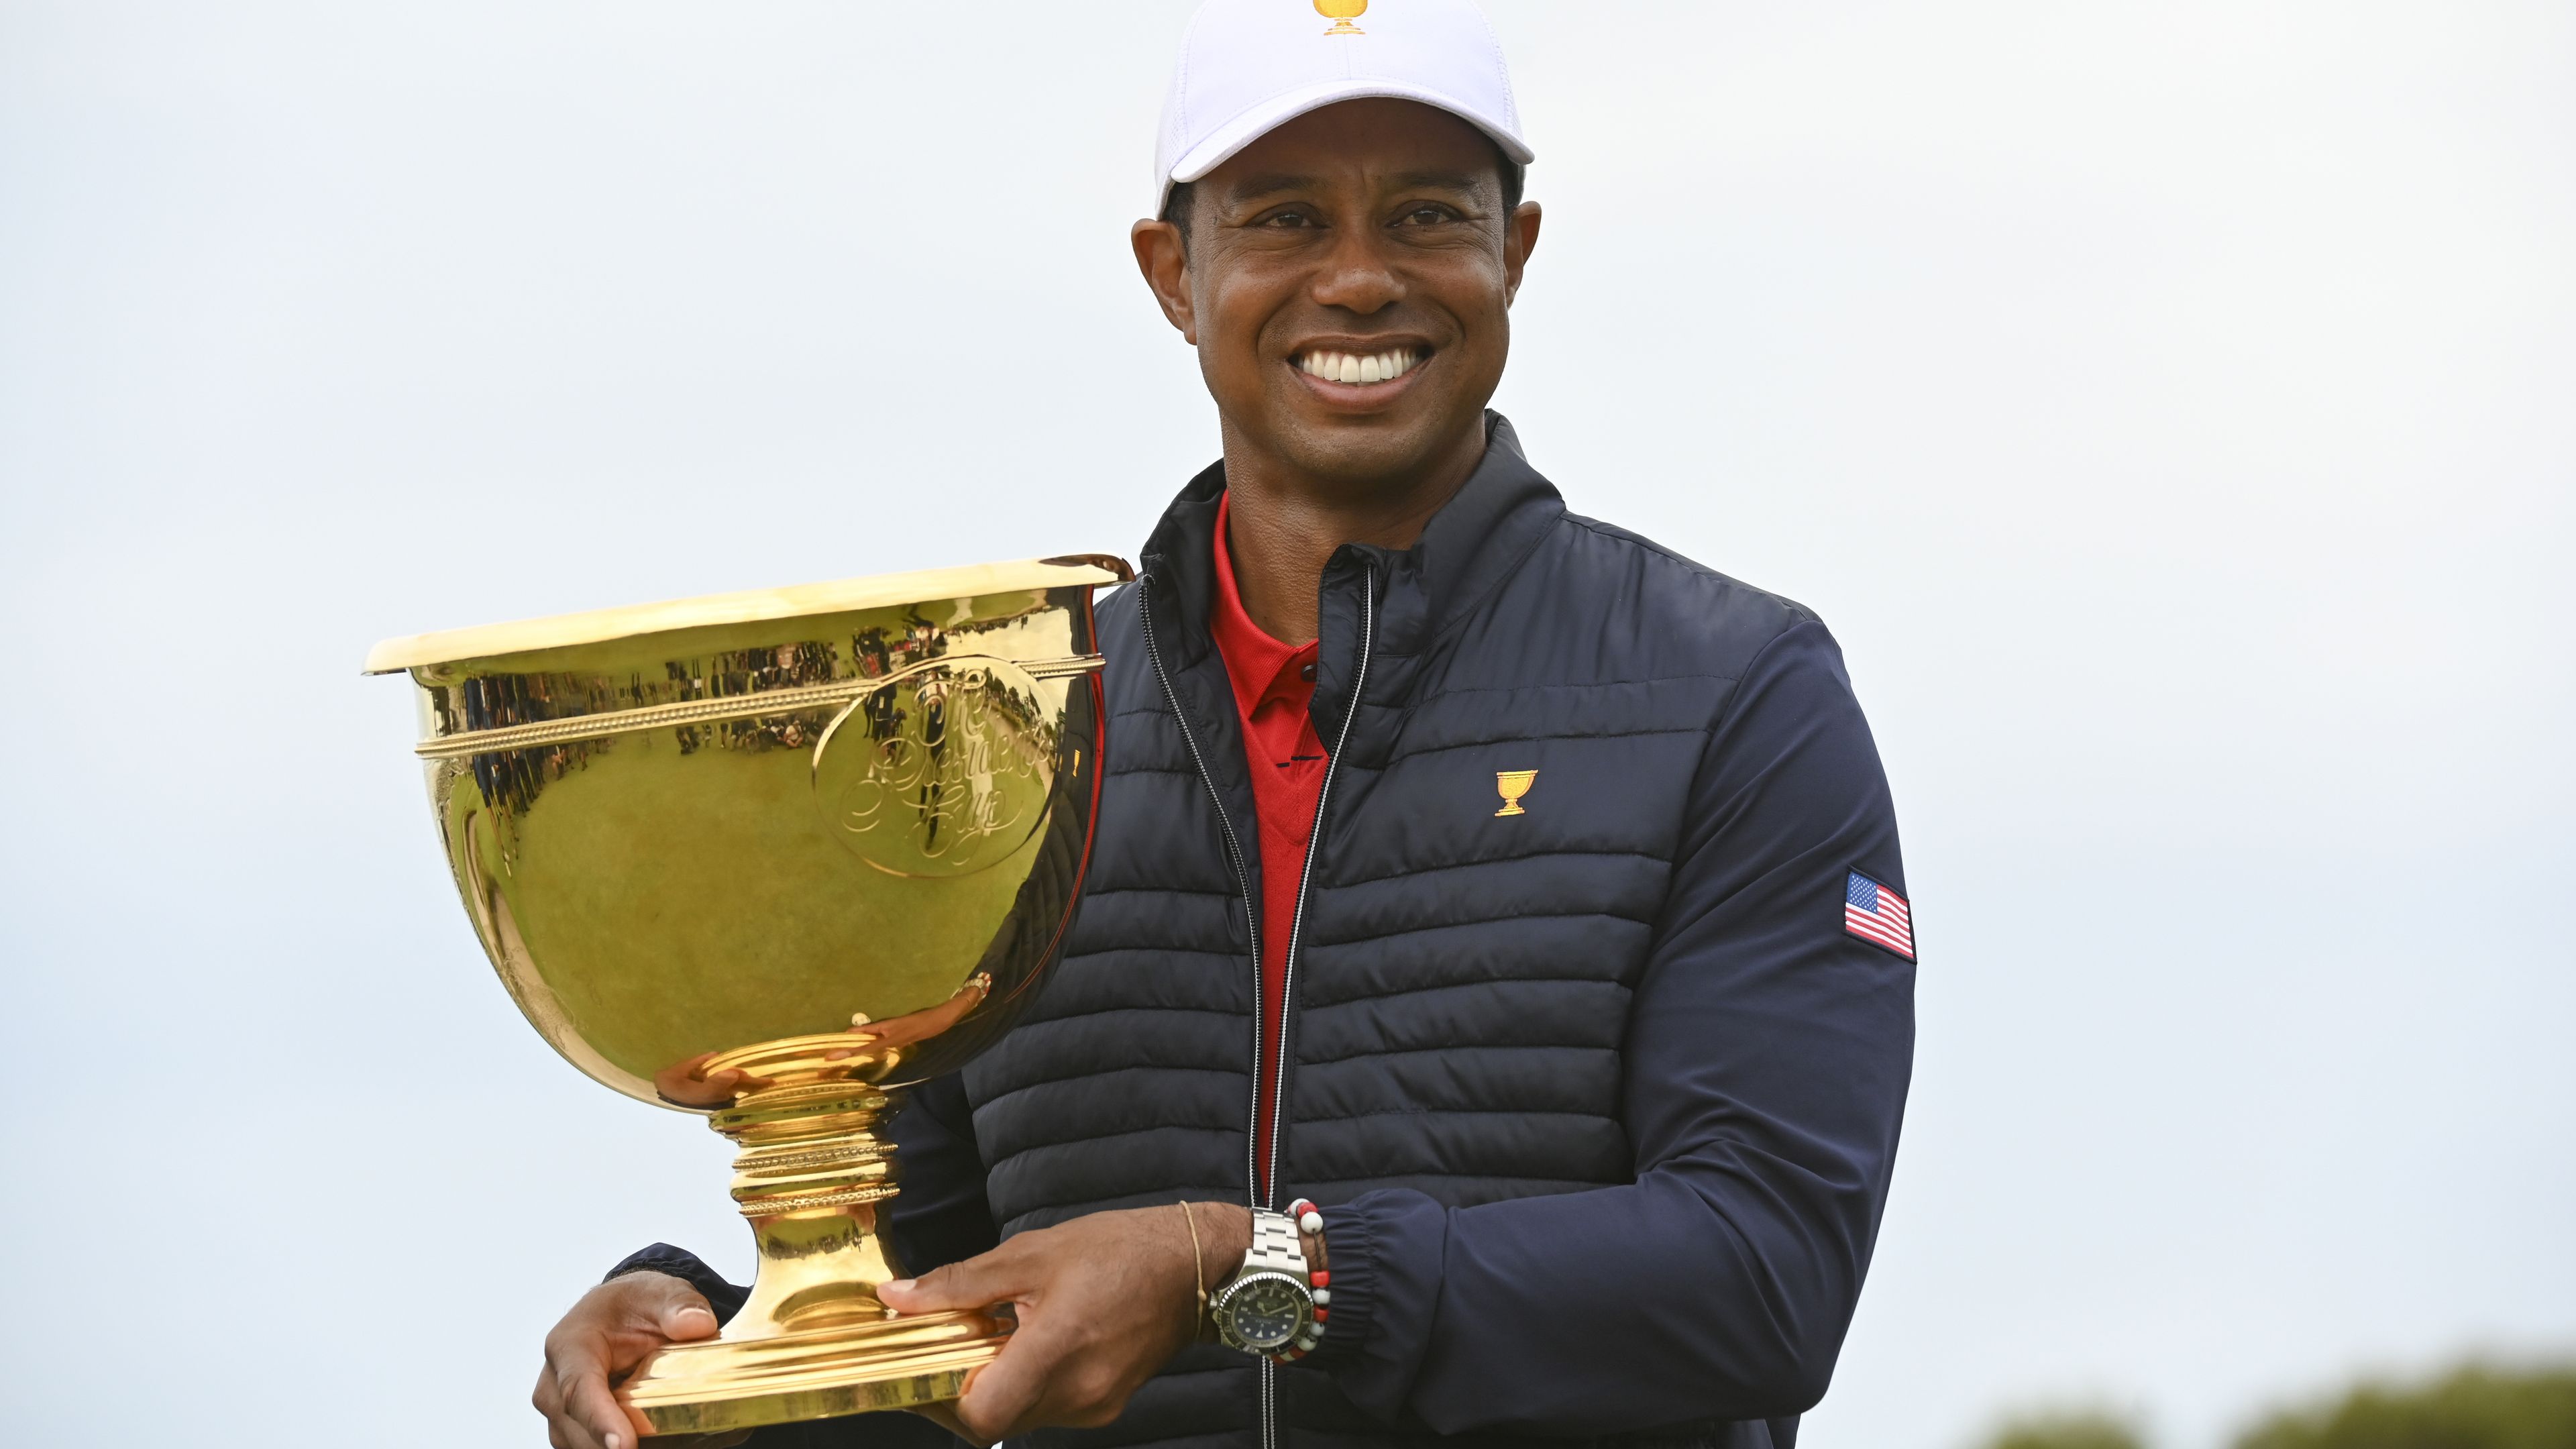 US Team Captain Tiger Woods holds the Presidents Cup trophy during the final round singles matches at the Presidents Cup at The Royal Melbourne Golf Club on December 15, 2019, in Victoria , Australia. (Photo by Ben Jared/PGA TOUR via Getty Images)